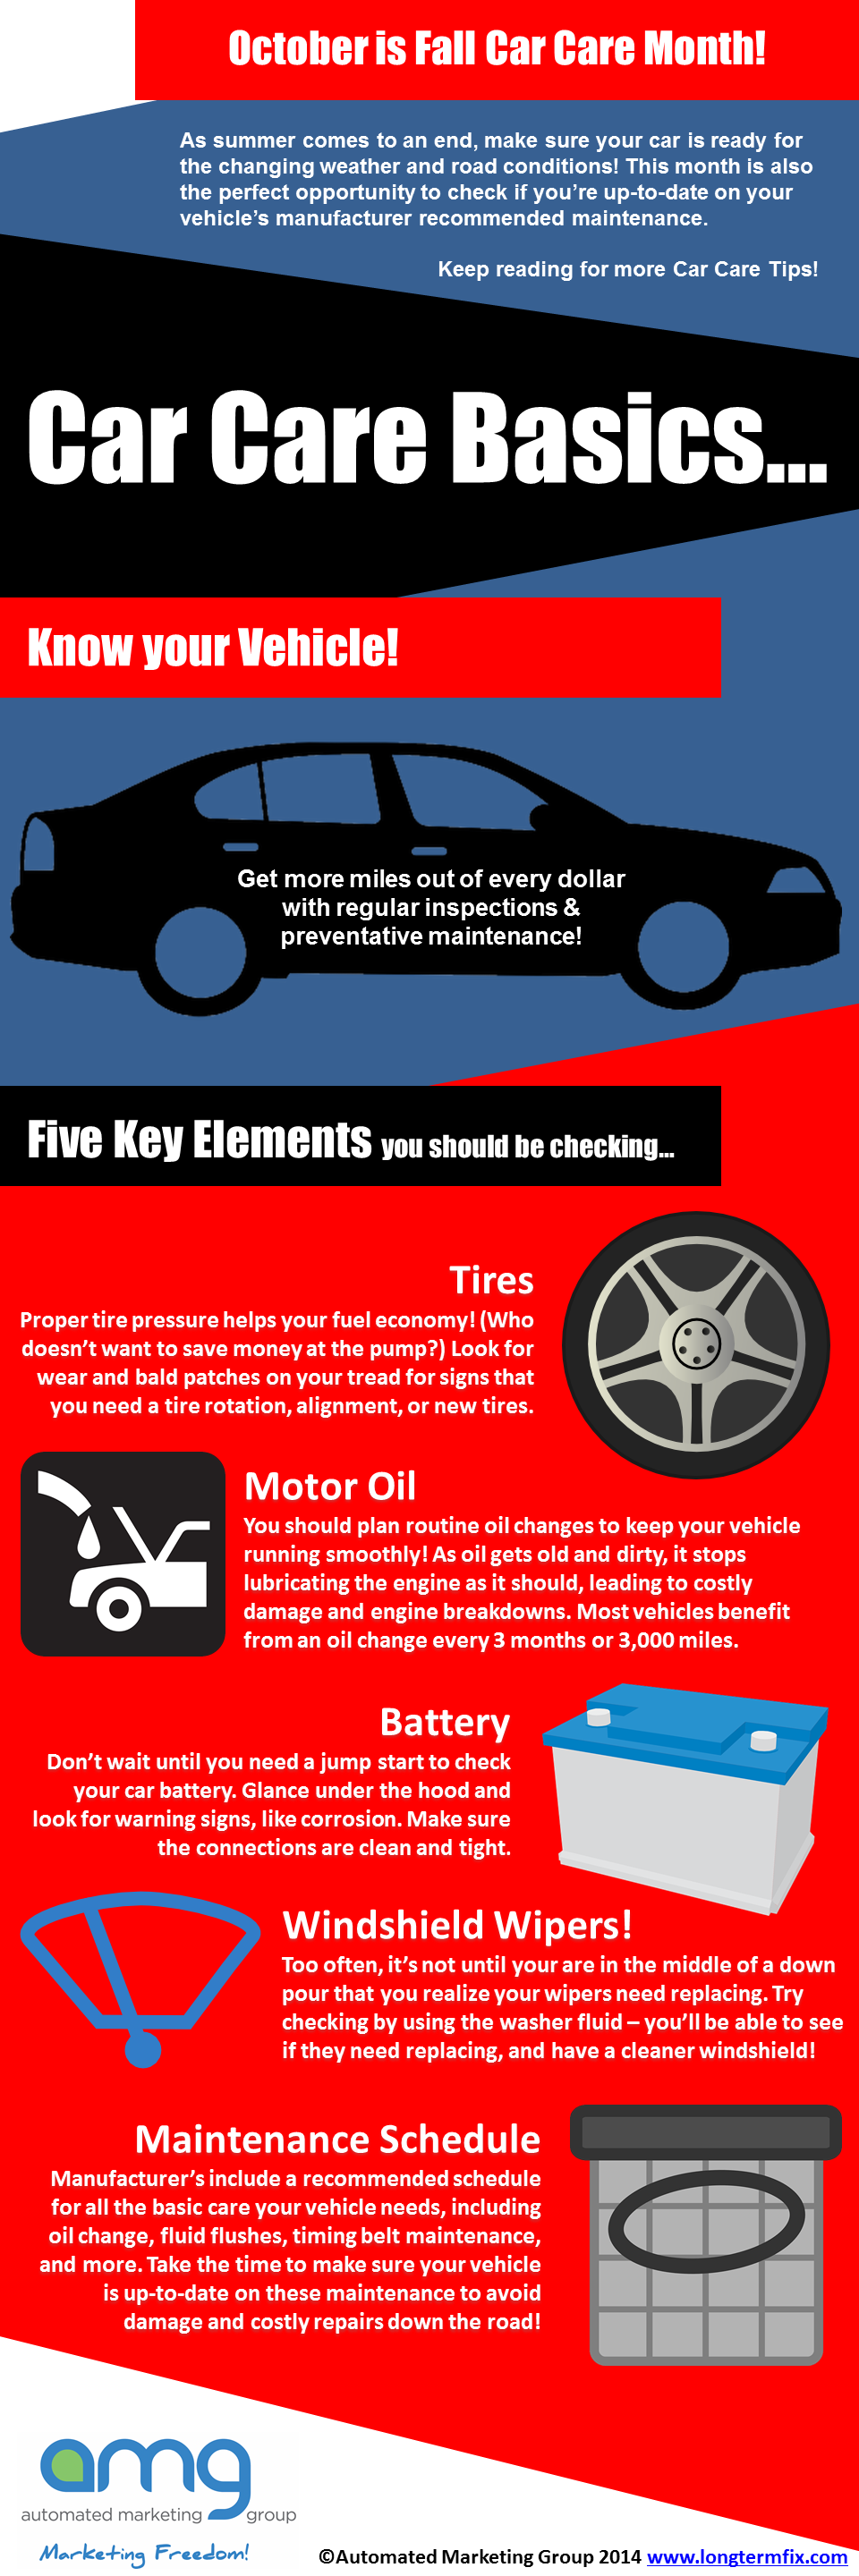 10 Common Car Detailing Mistakes, Car Care Tips